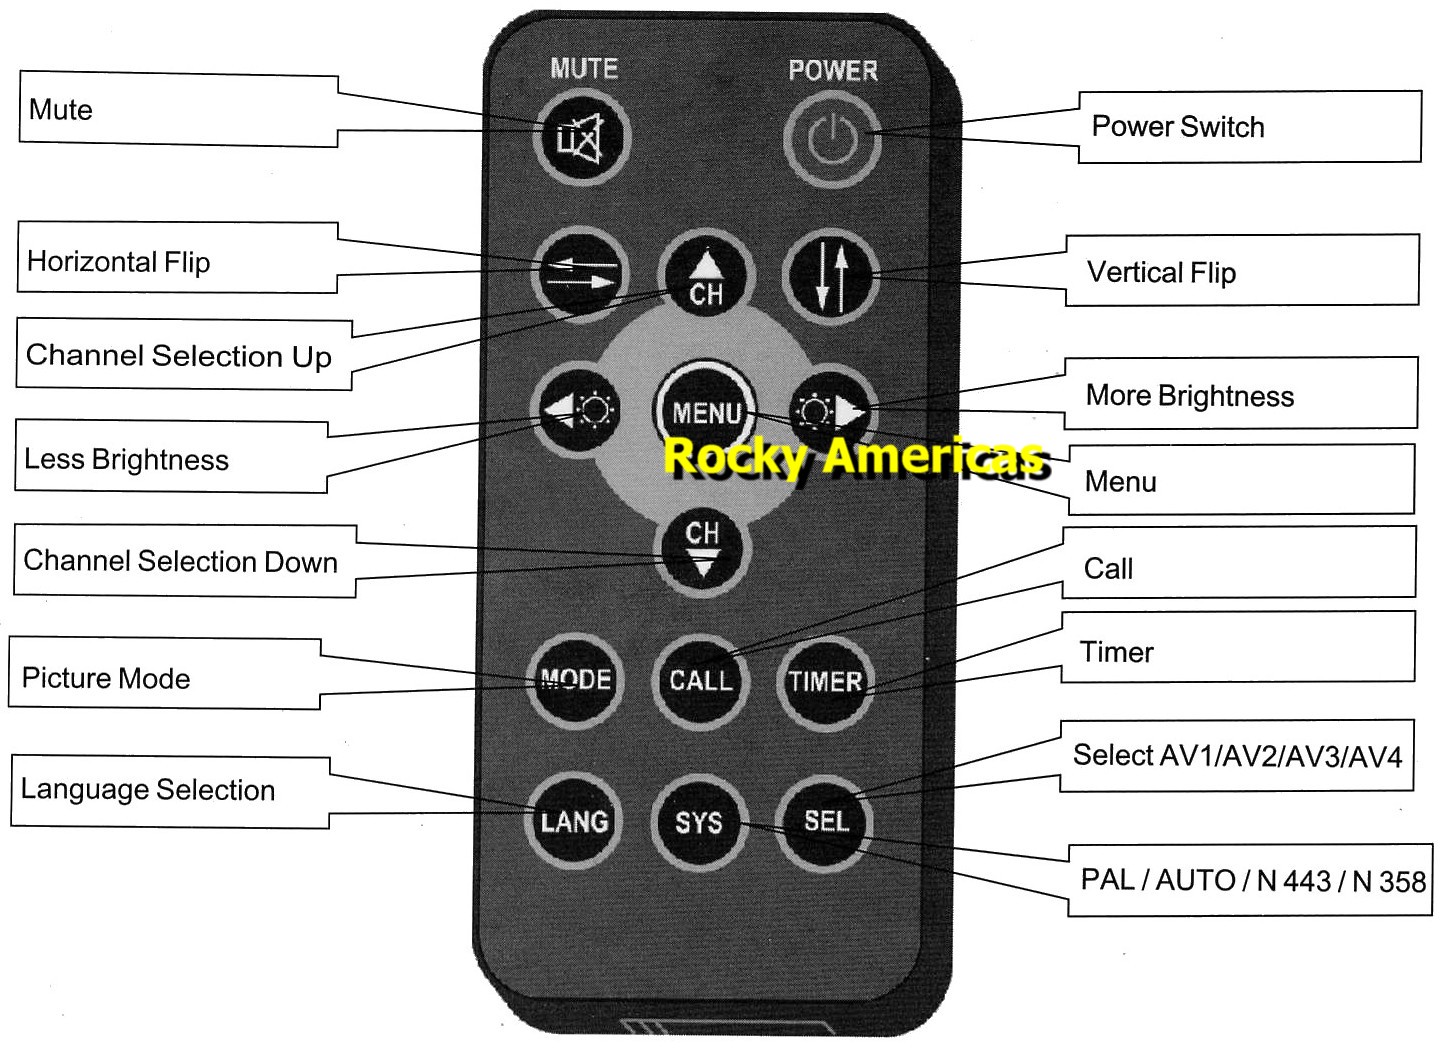 Remote Control Functions